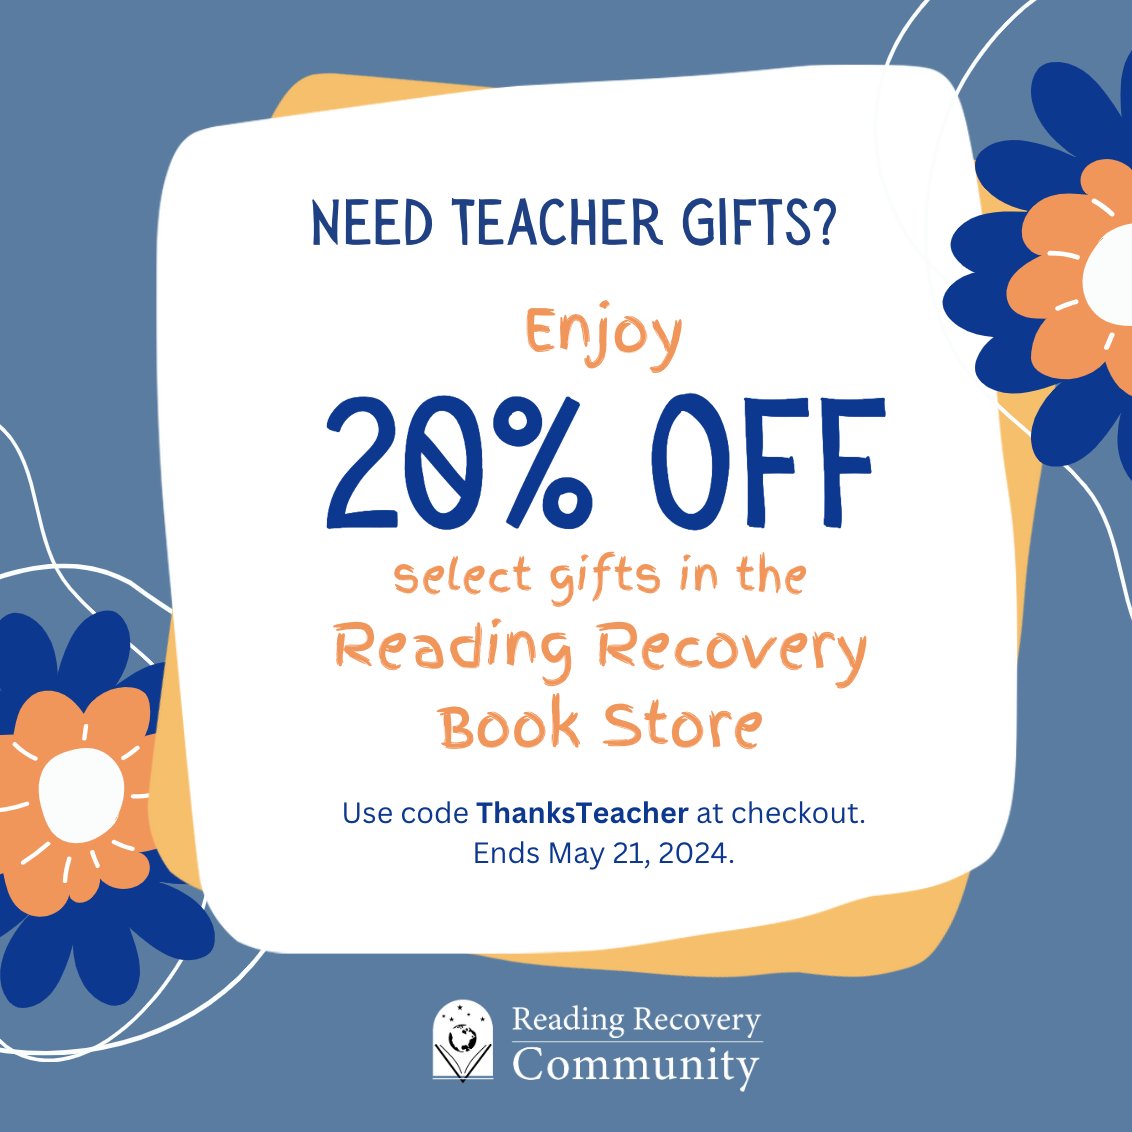 Share the ❤️ with your teacher heroes & save 20% on select gifts in the Teacher Appreciation Sale! Use coupon code THANKSTEACHER now through 5/21/24. ow.ly/AS5a50Rr9qO